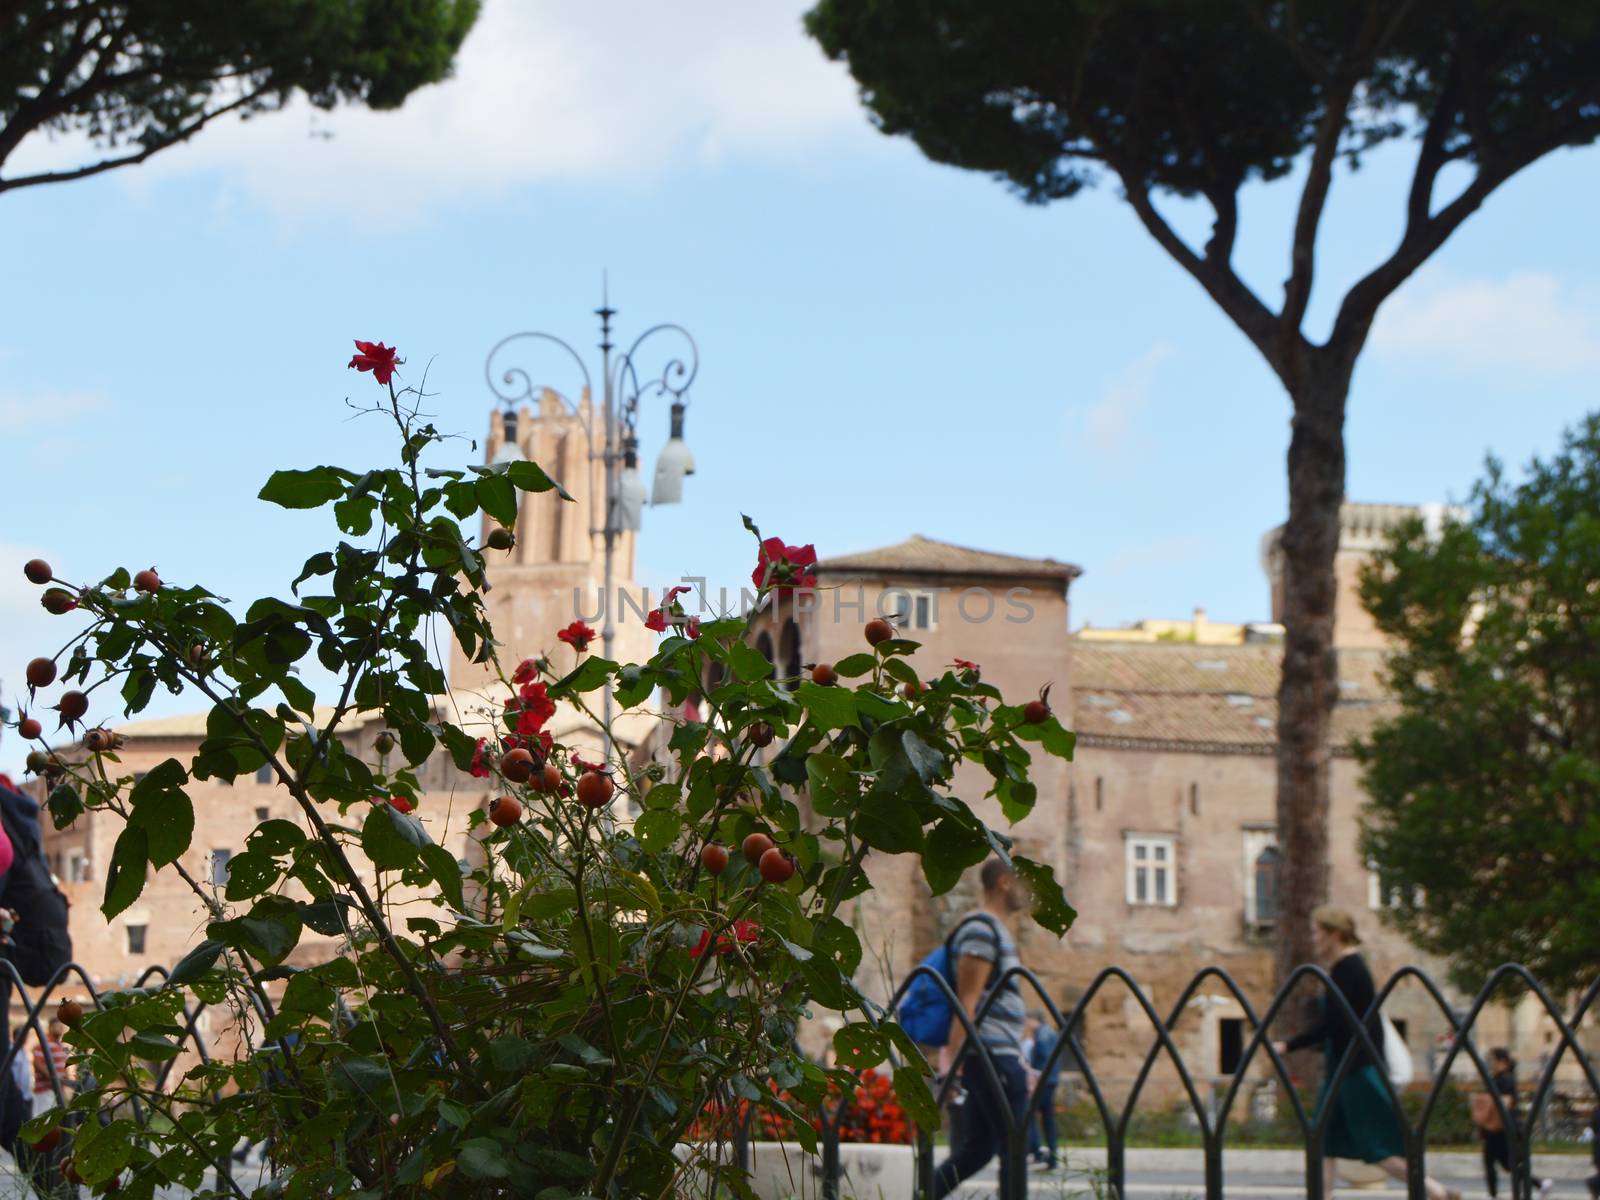 View of the Via dei Fori Imperiali is the main tourist street of Rome, through the flowering wild rose bushes, on 7 October 2018.